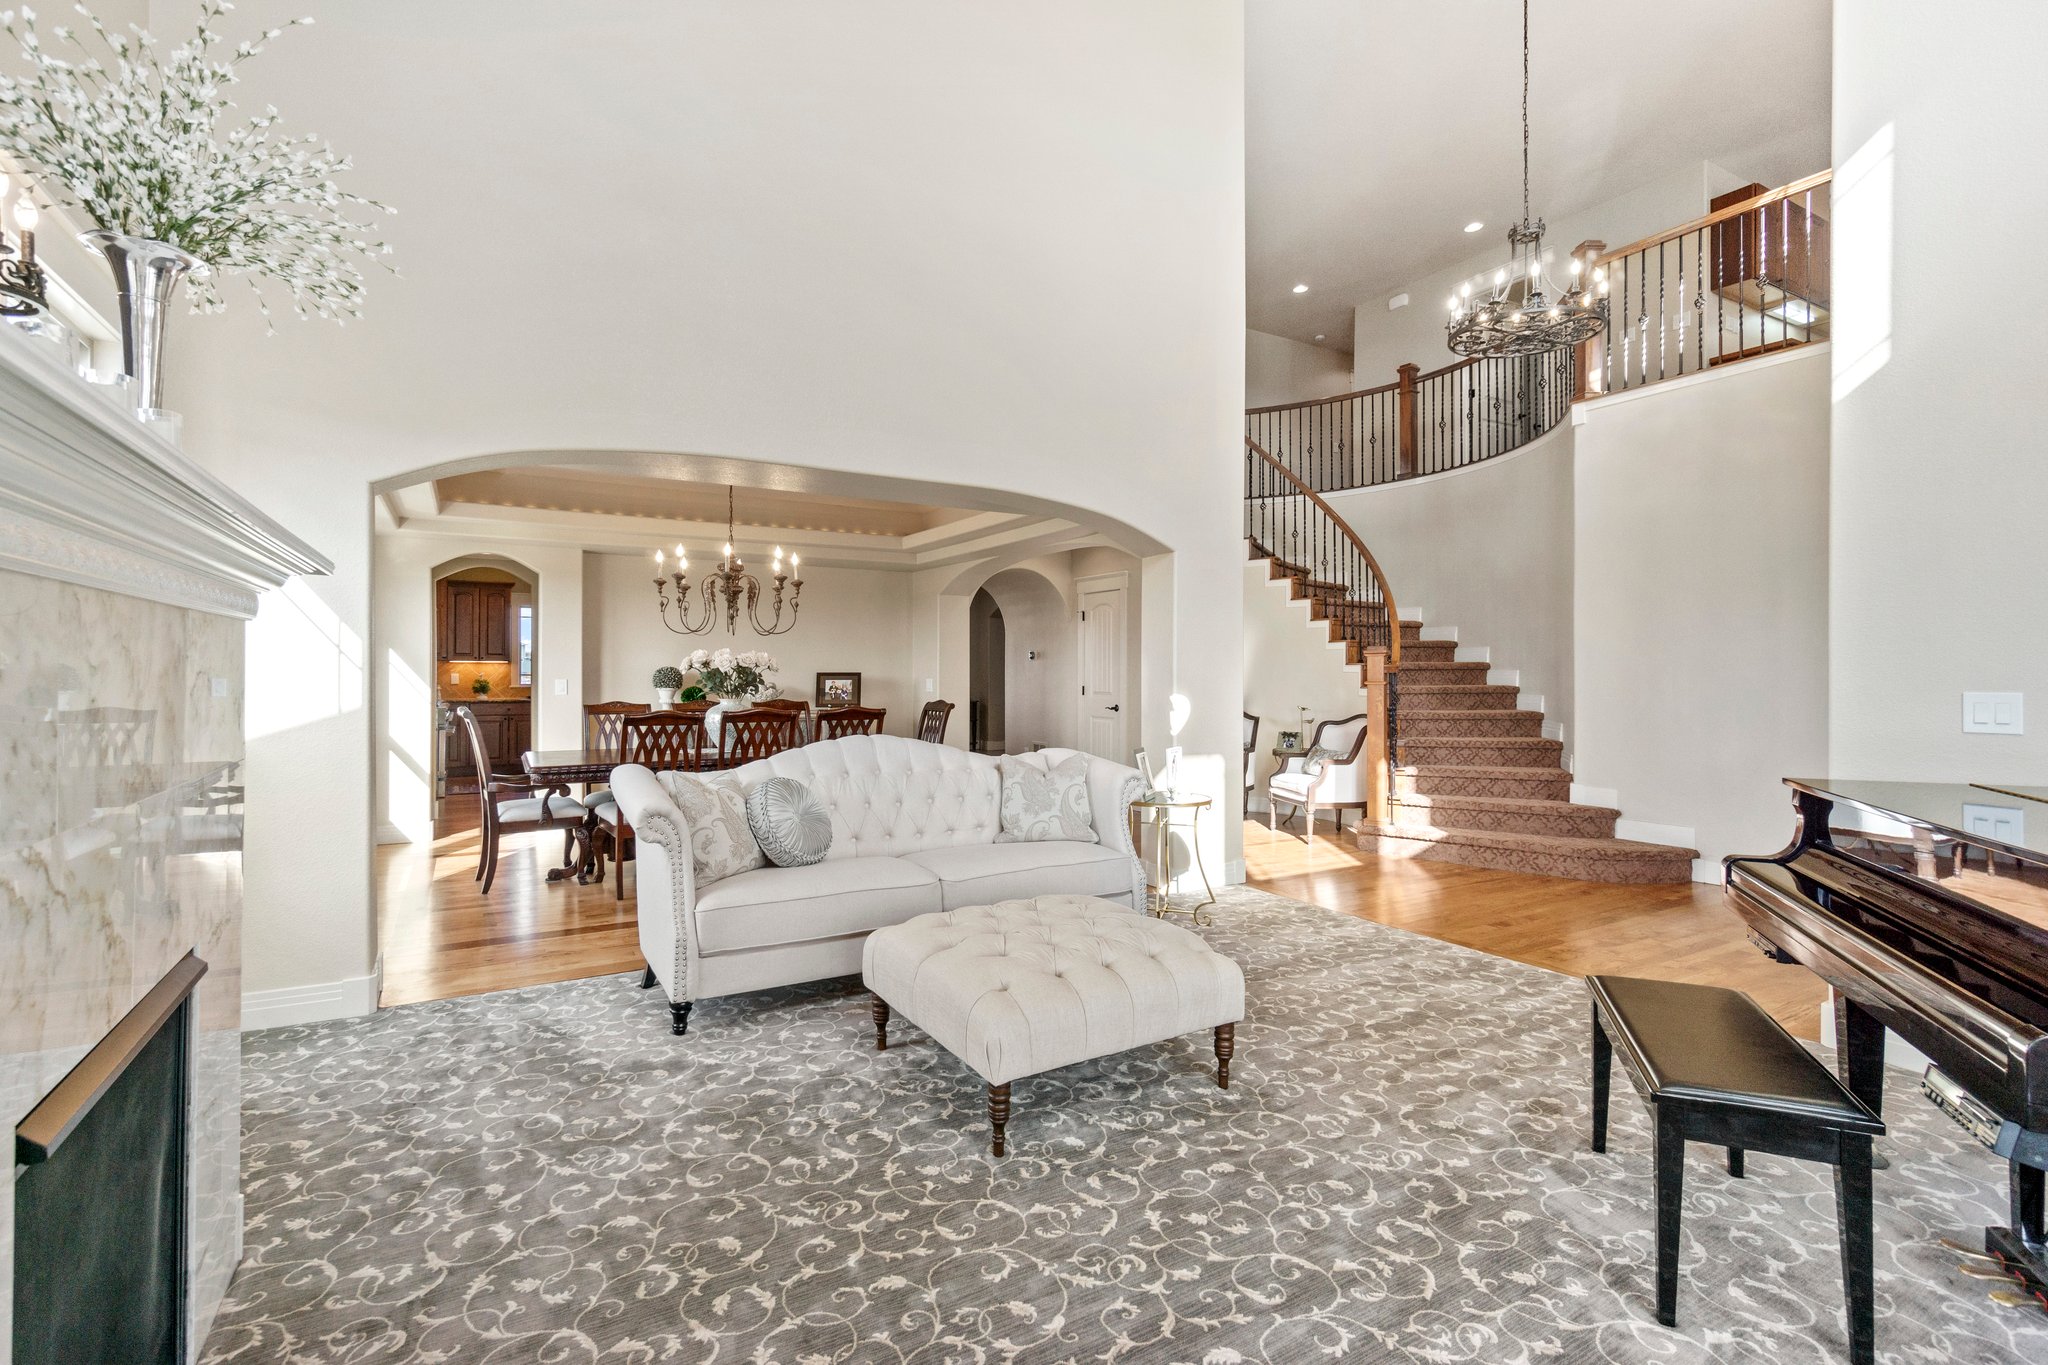 Vaulted ceilings with large windows flood your entrance with beautiful natural light